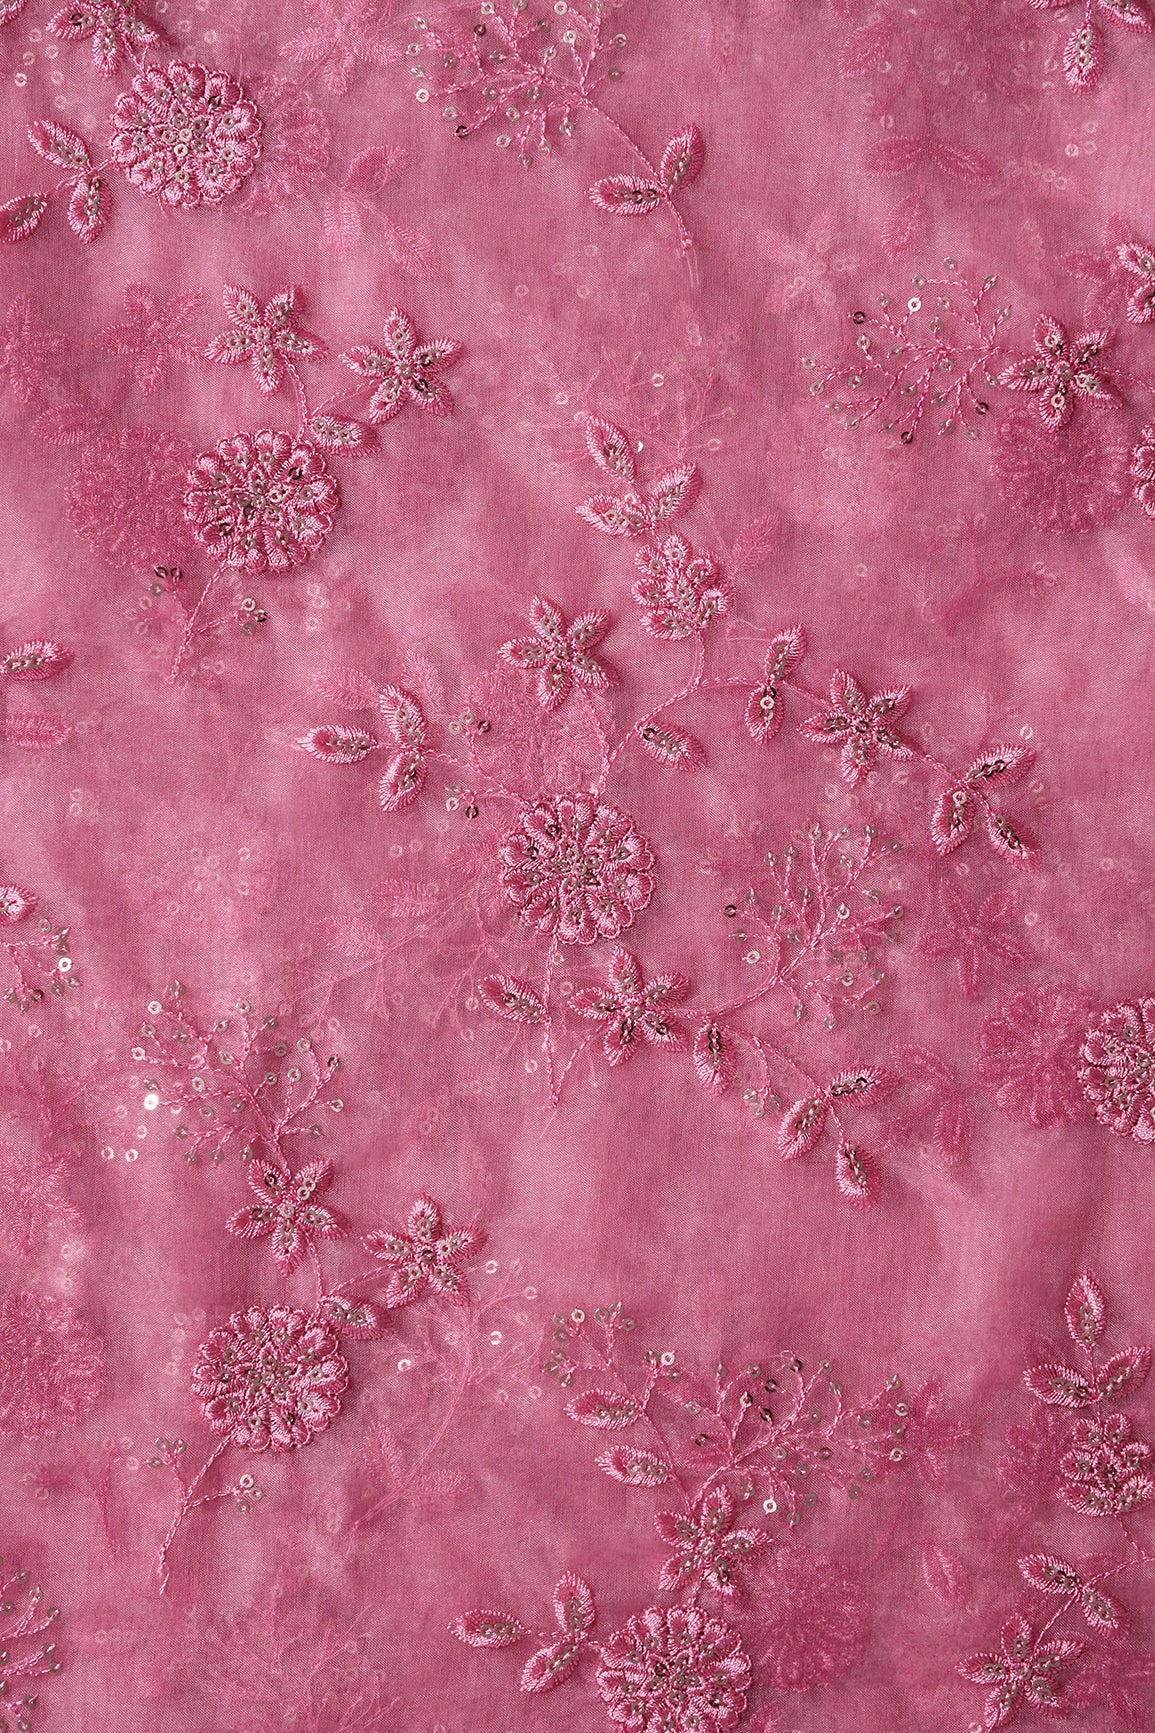 Gold Sequins With Thread Floral Embroidery On Pink Organza Fabric